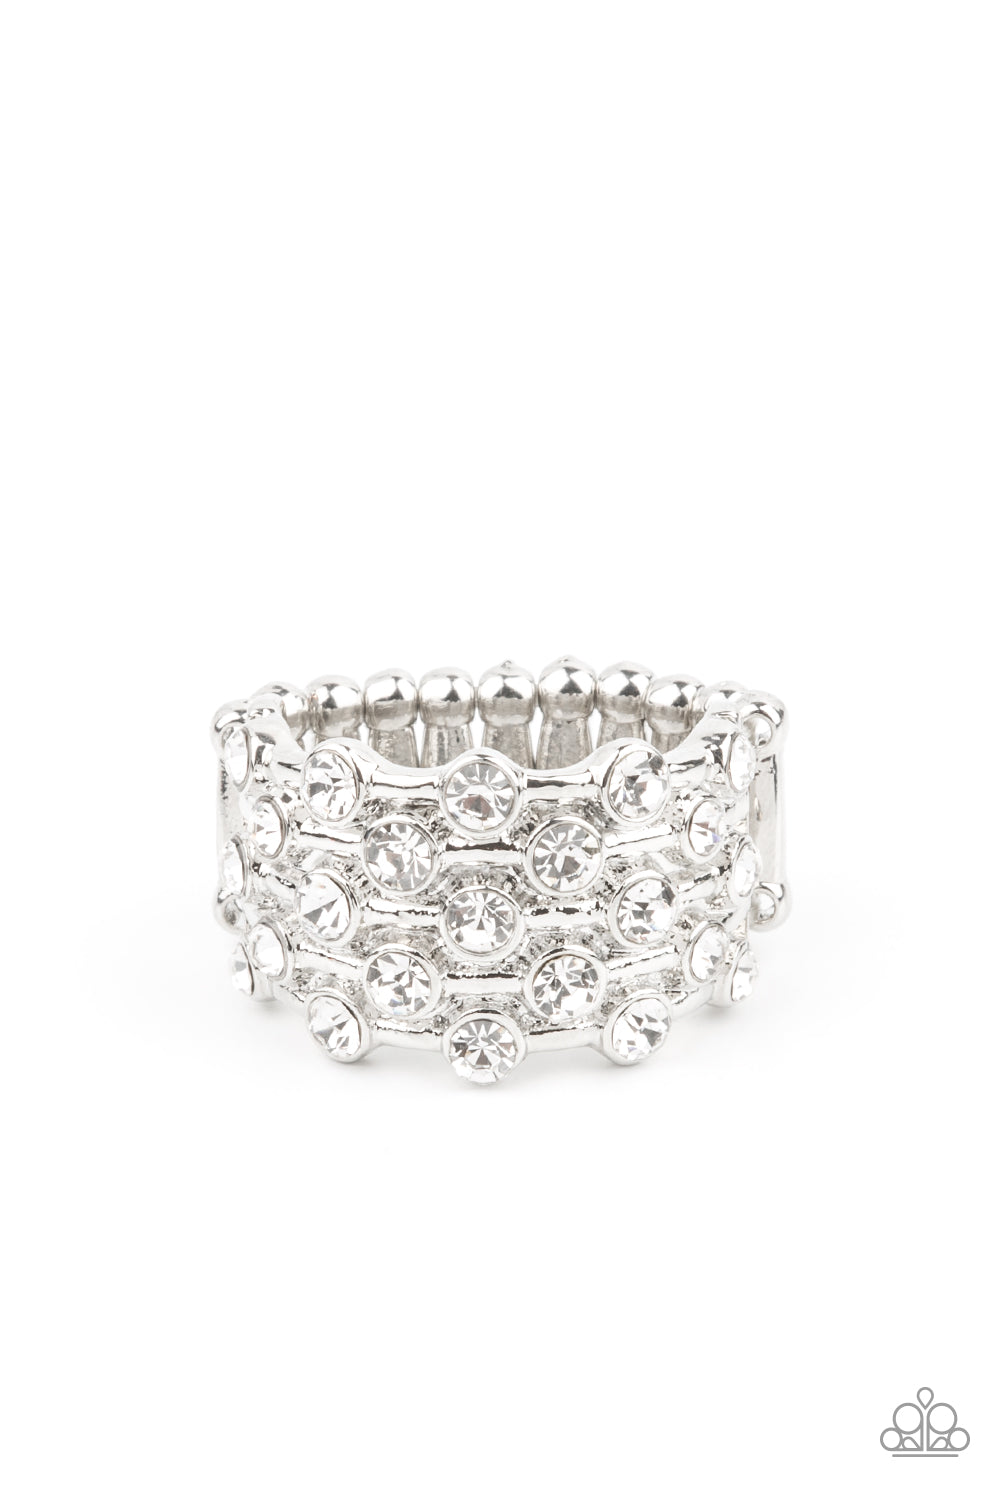 Sparkling white rhinestones encased in silver frames line up in layers across shiny silver bands creating a shimmering statement atop the finger.